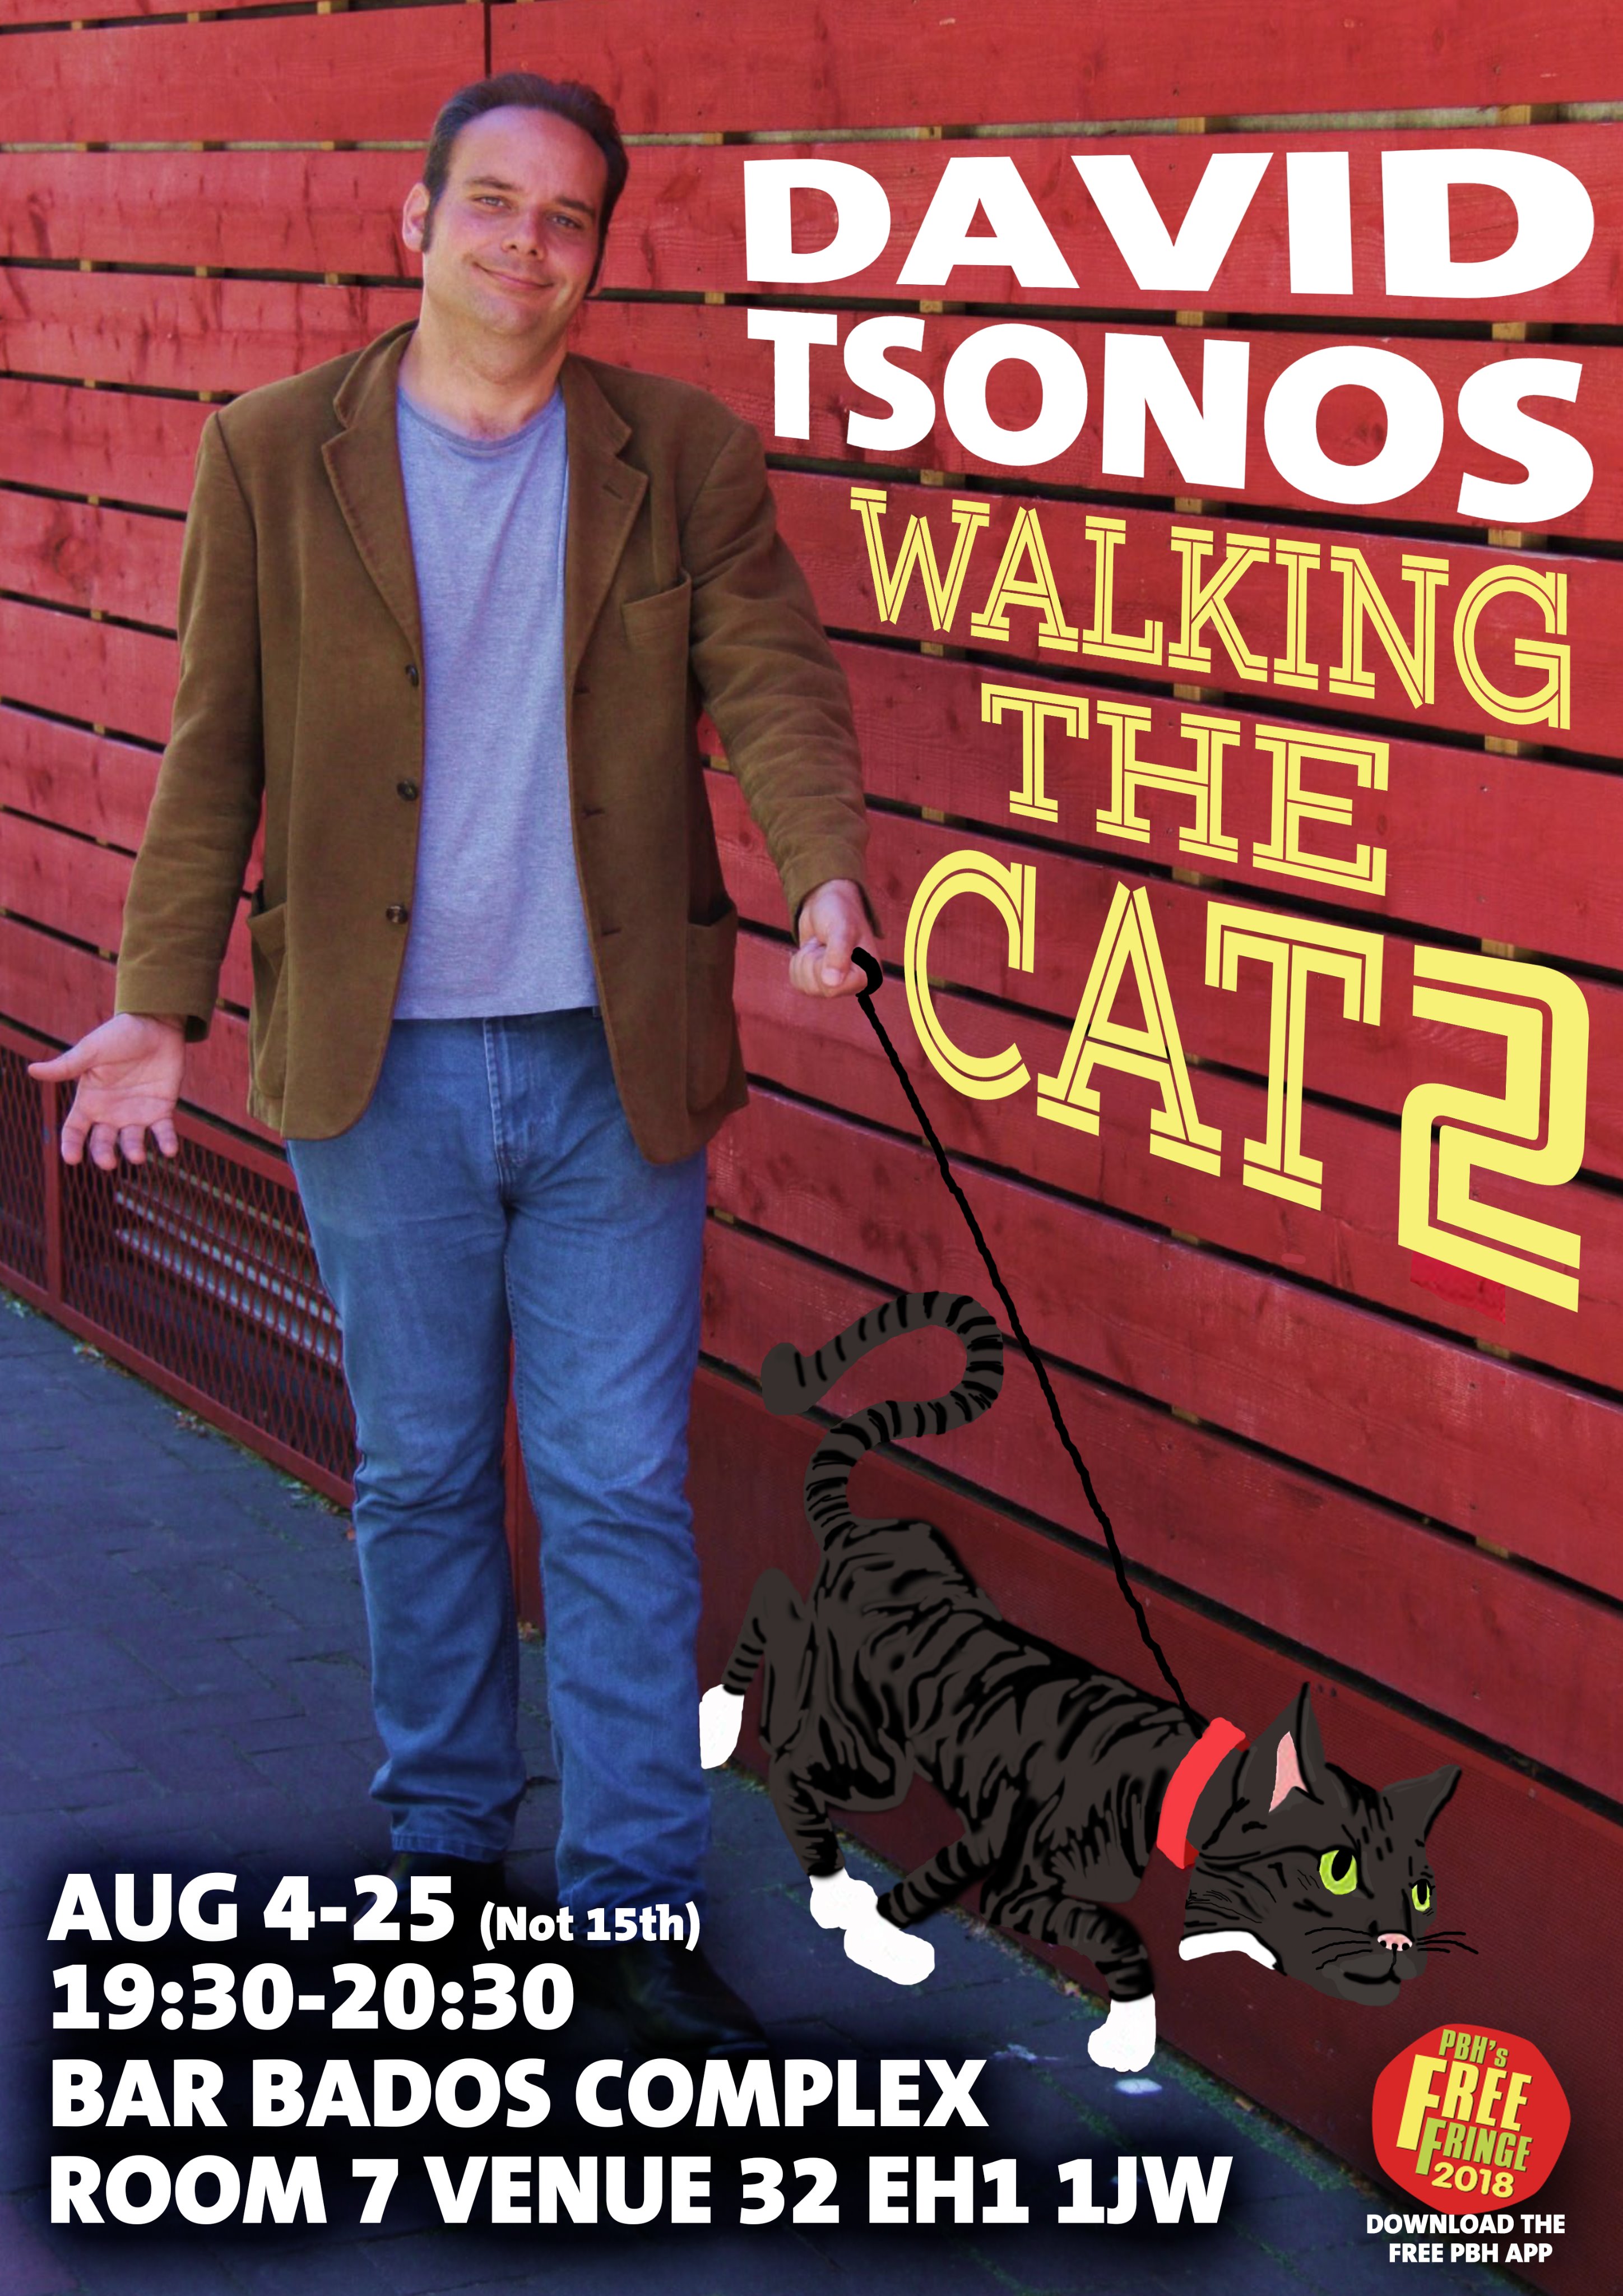 The poster for David Tsonos: Walking the Cat Two